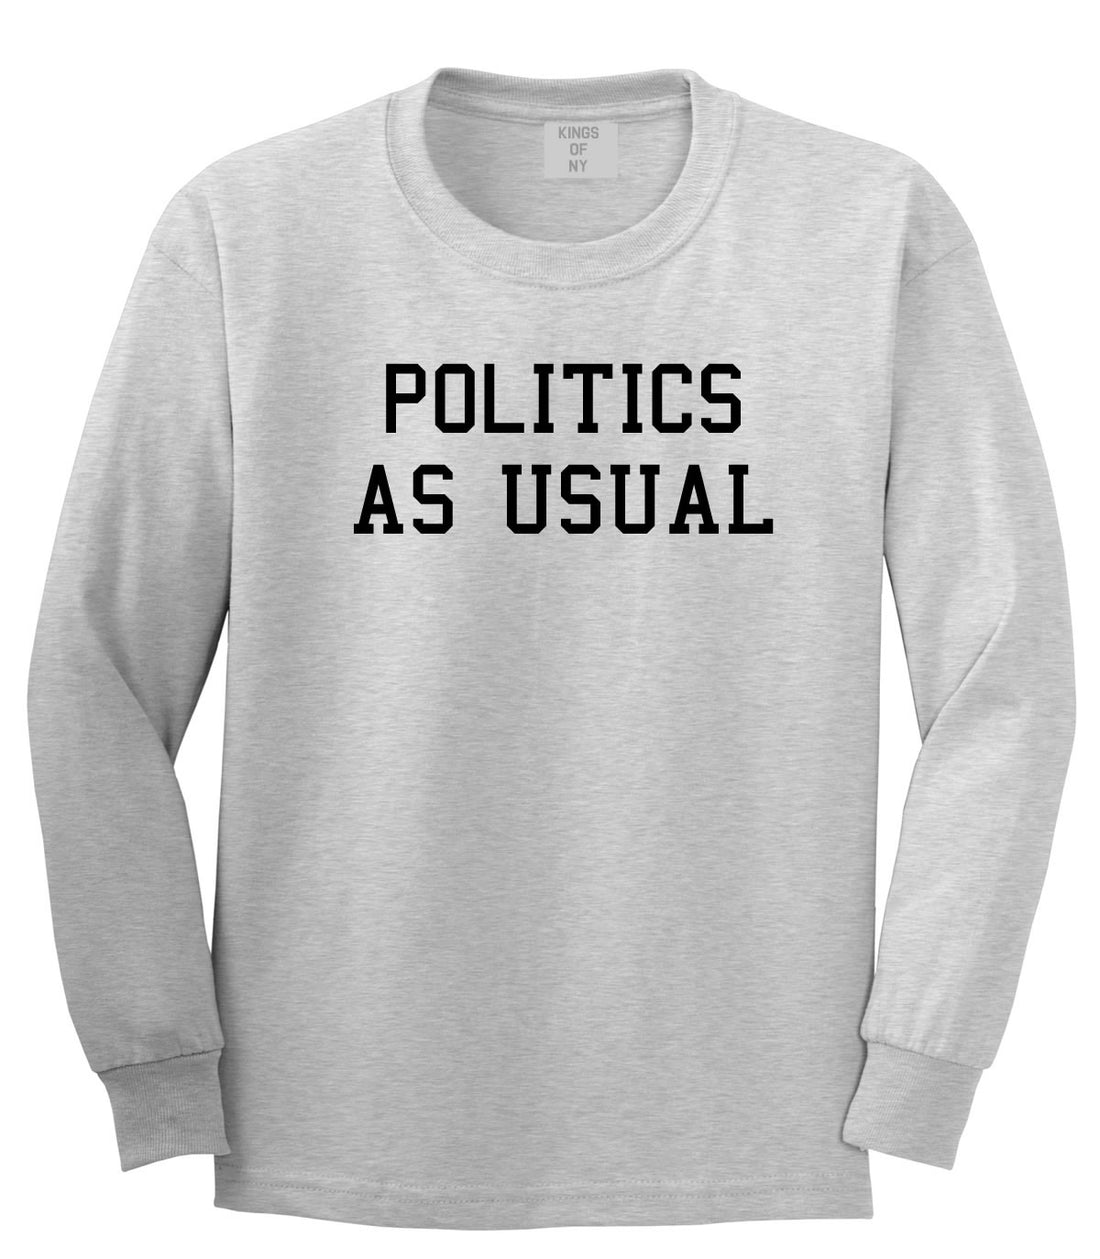 Politics As Usual Hiphop Lyrics Jay 23 Z Old School Long Sleeve T-Shirt In Grey by Kings Of NY